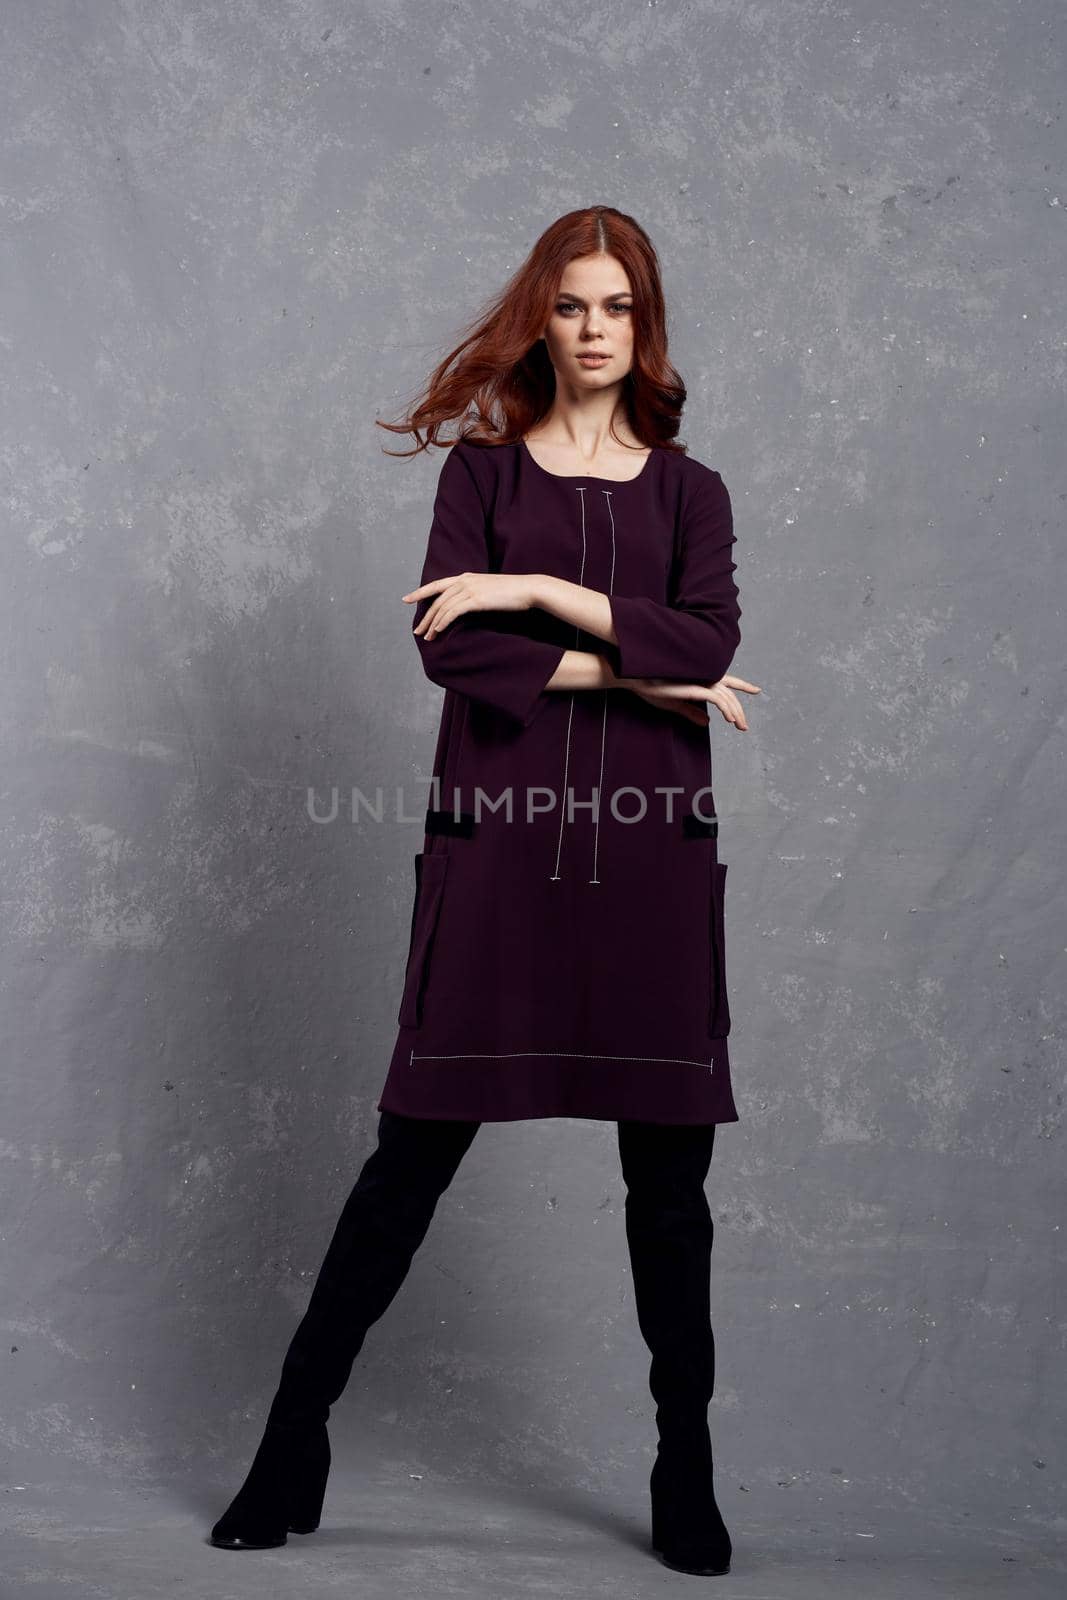 woman with red hair posing fashionable clothing elegant style. High quality photo